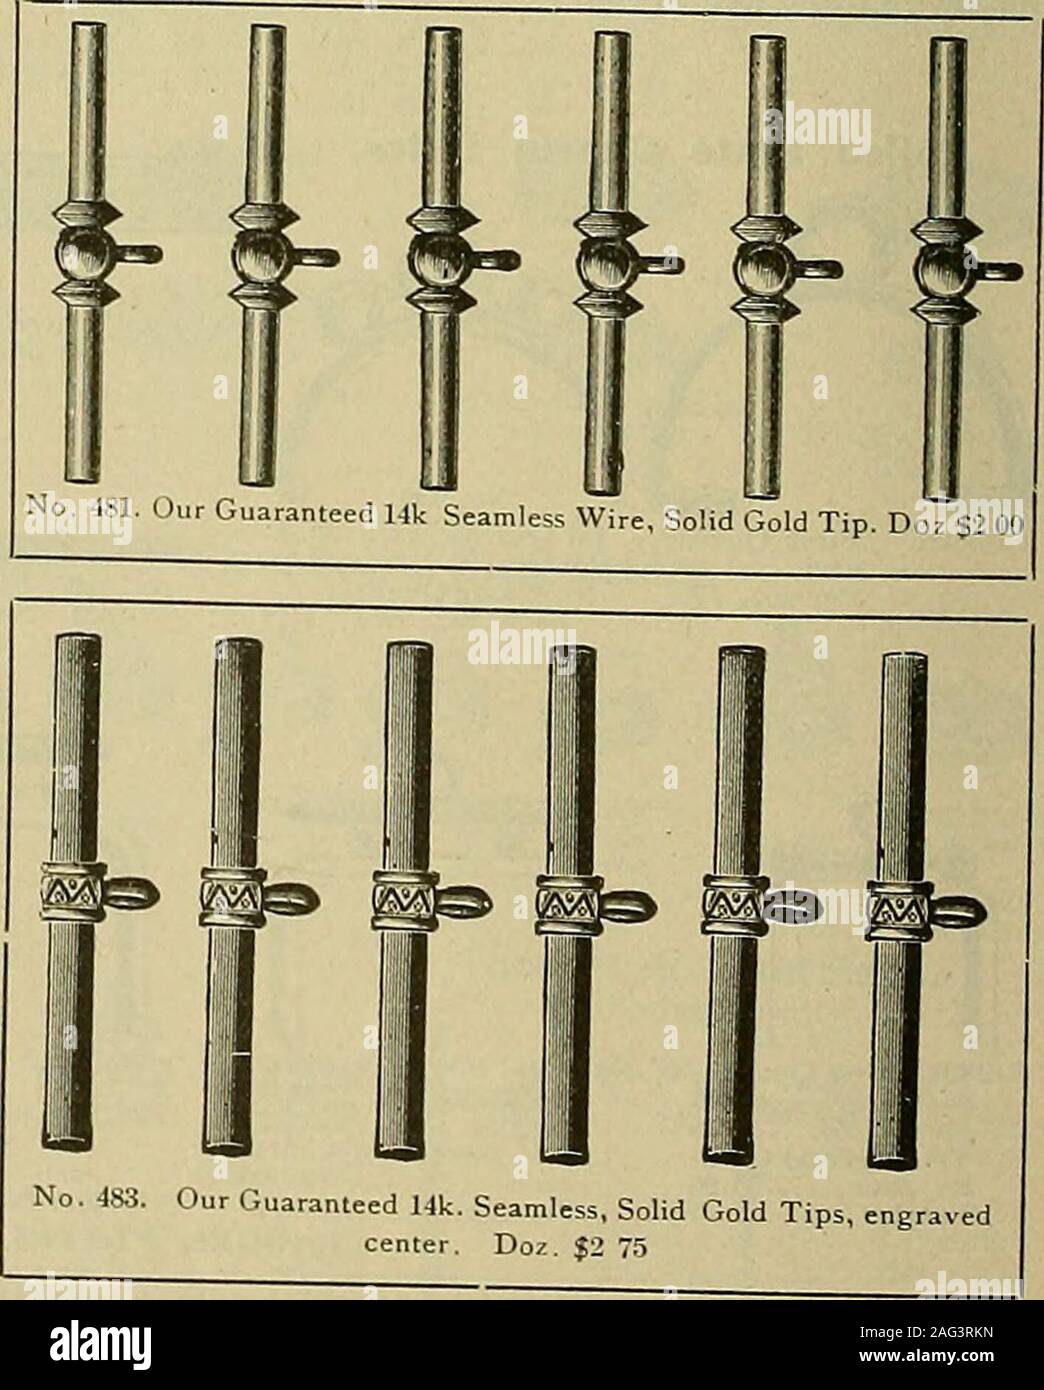 . 20th century catalogue of supplies for watchmakers, jewelers and kindred trades. iNo. 47:i. Our Guaranteed Uk,Seamless Wire, Solid Gold Tip. Do .$1 90 474. Rolled Plate, Solid Gold Tip. Doz 475 Rolled Plate Doz 476. Gold Plated (imitation Roiled piateY. Dm 477. Sliver. Doz 47s. Solid Gold, 10k, Dwt. 80c-iiic ^ ^ ?1 65. 4S4. Seamless, Rolled Plate, Solid Gold Tip. Doz |2 ( For Watchmakers, Jewelers and Kindred Trades,JEWELERS FINDINGS. ?^^^i ^1^ Our Guaranteed 14k seamless, with14k Tips, Soldered Link Toggles, pcrdoz No. 495, $2,25 R. F. Bars. Gold Tips, Soldered Tog-gles, per doz 501, 1.00 R Stock Photo